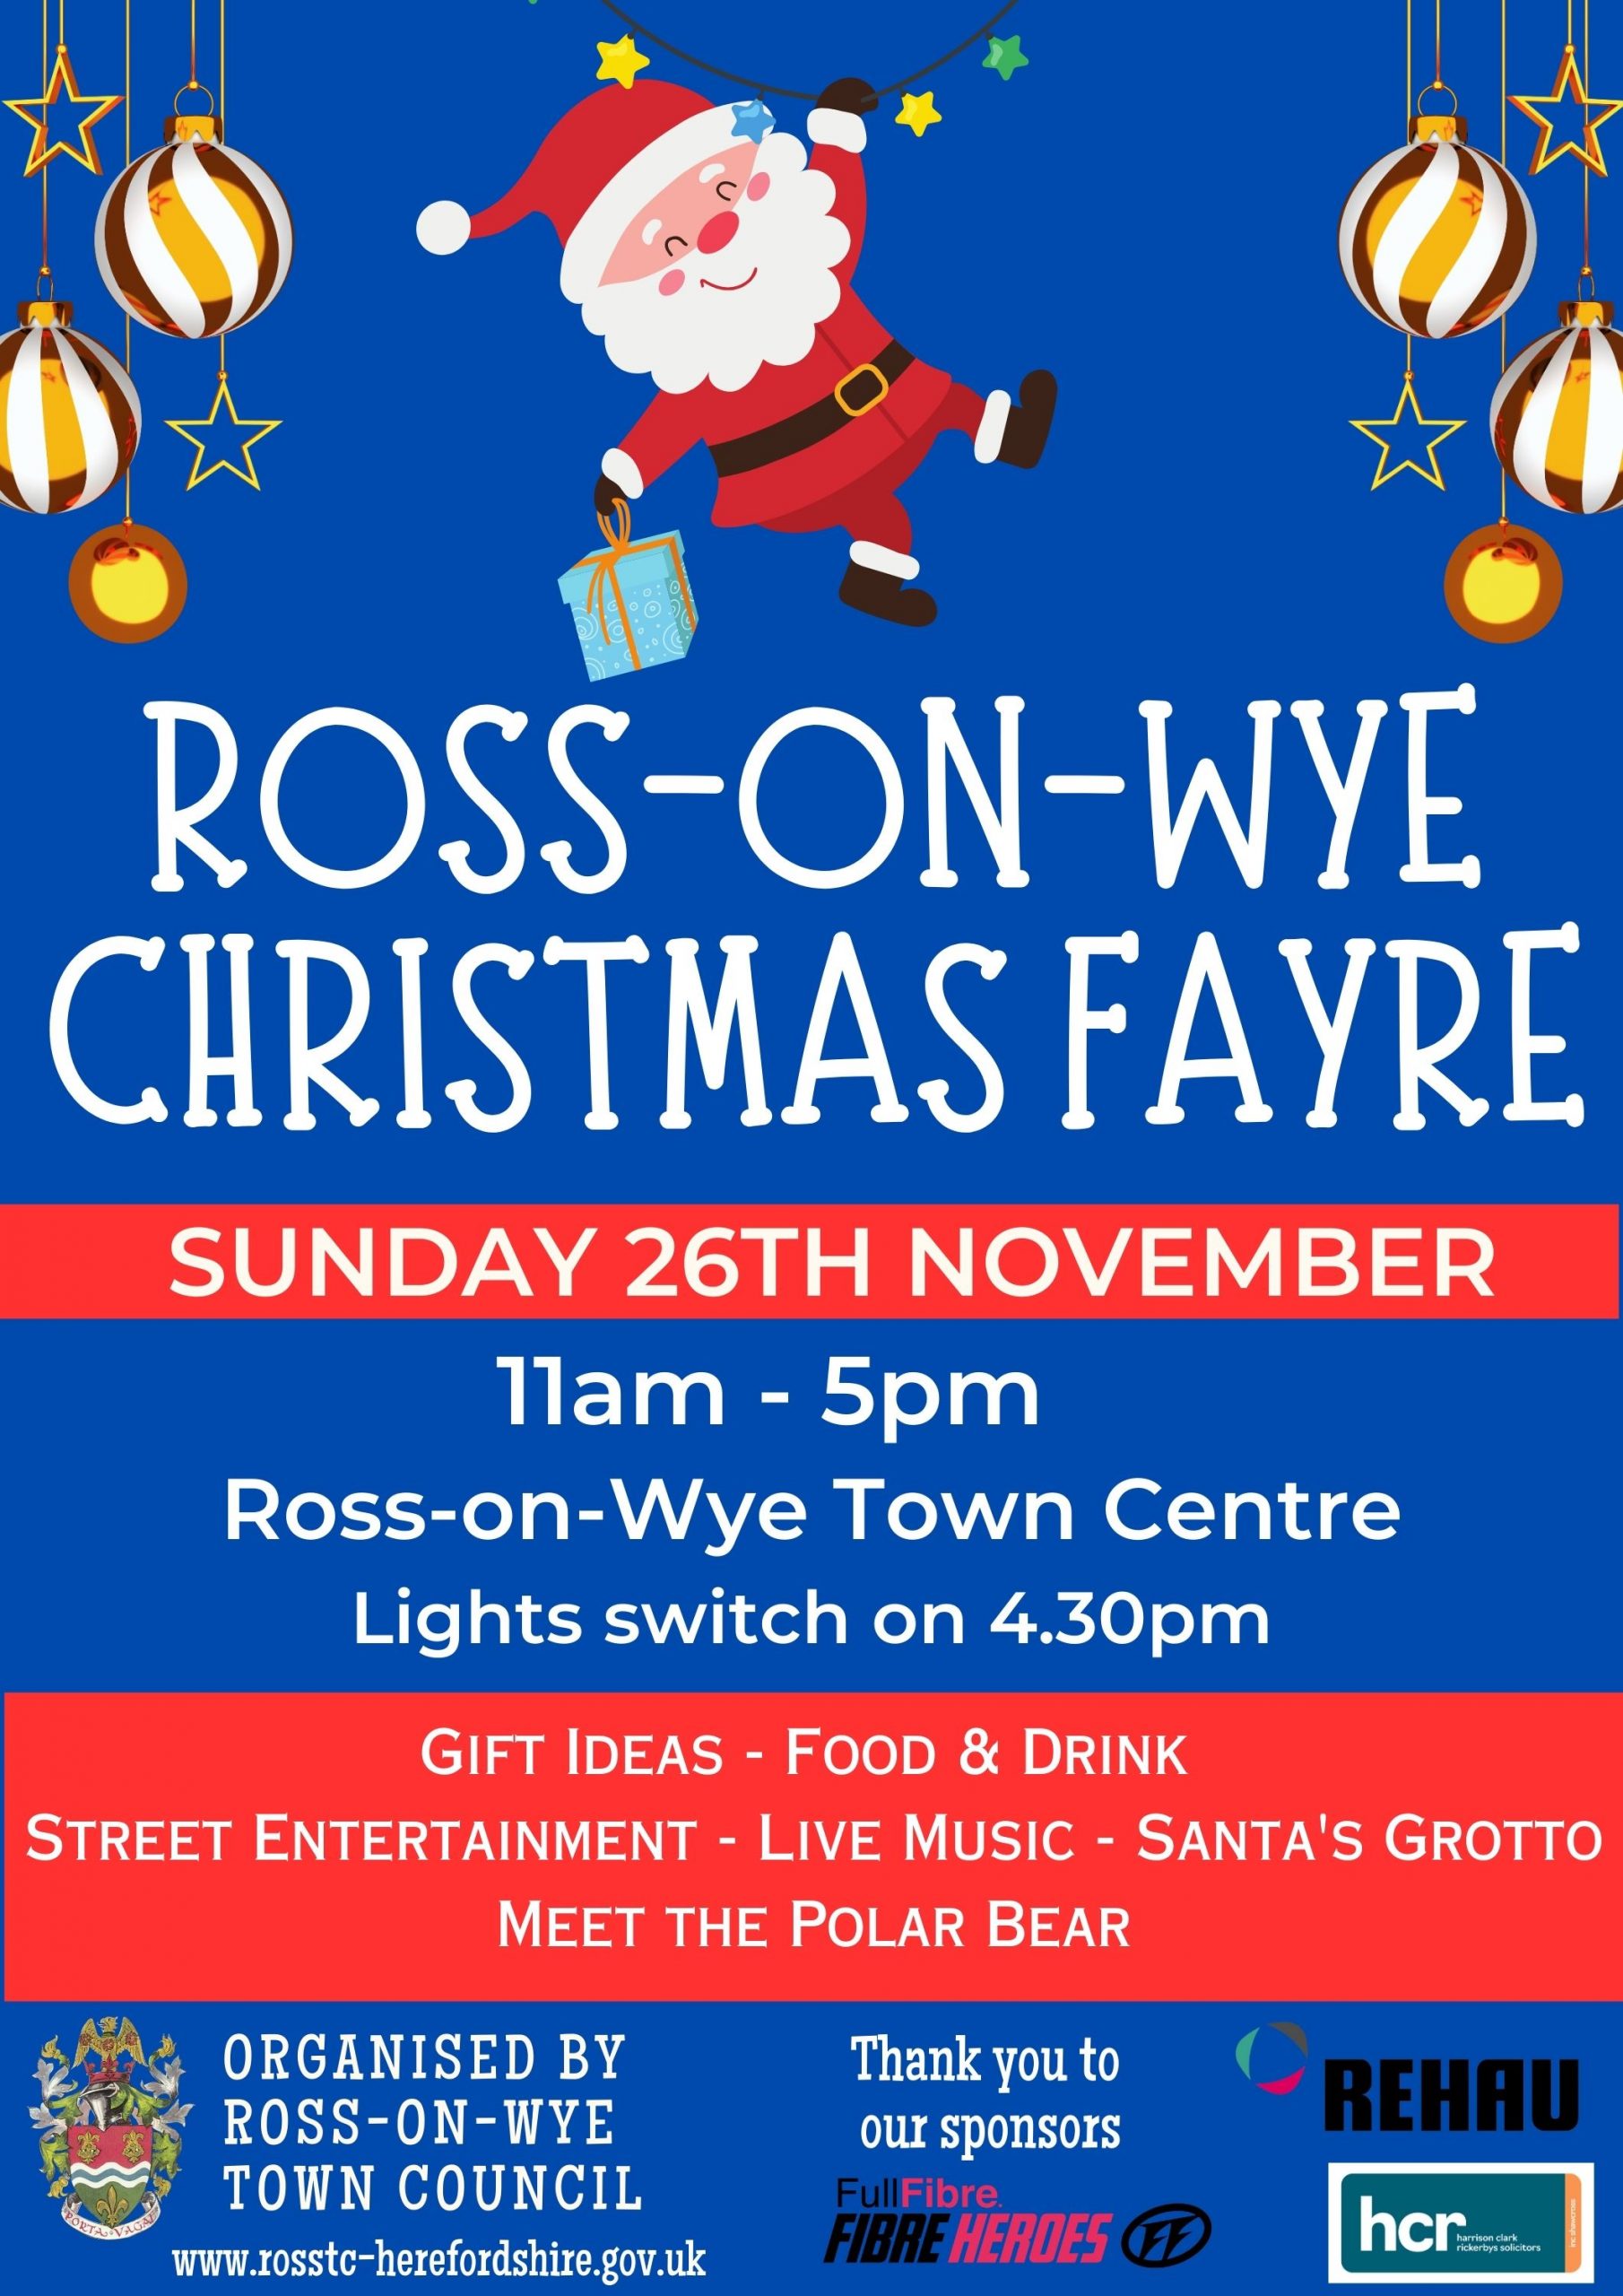 Ross-on-wye Christmas Fayre poster 23 A4 size